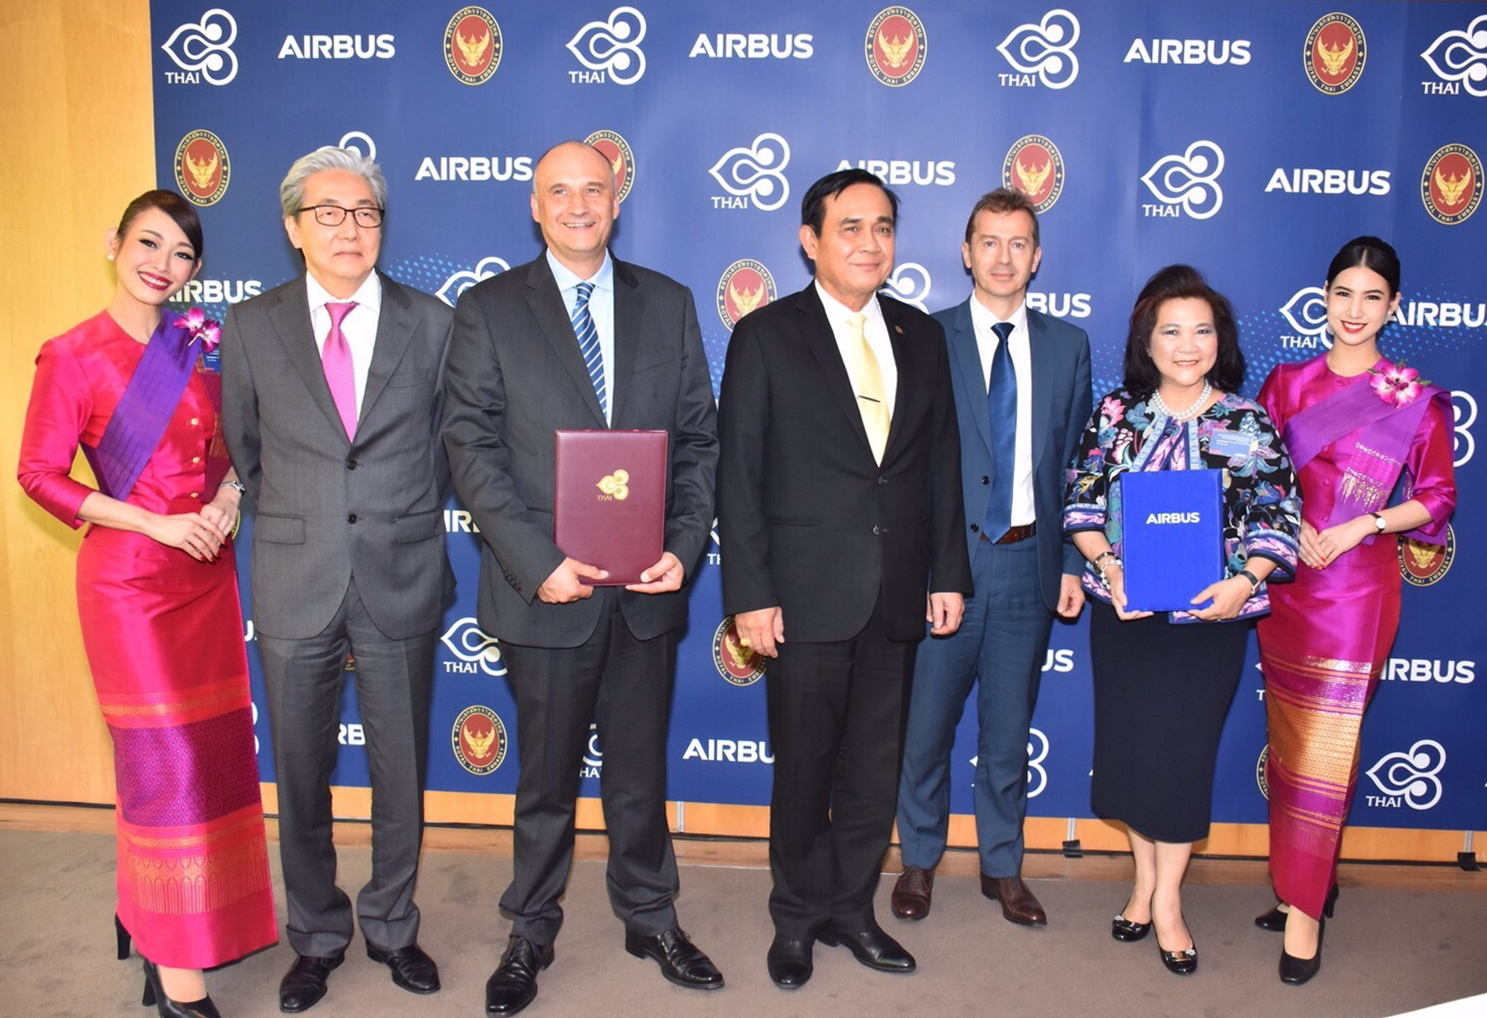 General Prayut Chan-o-cha, Prime Minister of Thailand presided over the signing ceremony agreement between Thai Airways International Public Company Limited (THAI) and Airbus to establish a new joint venture maintenance and overhaul (MRO) facility at U-Tapao International Airport near Bangkok. Click to enlarge.